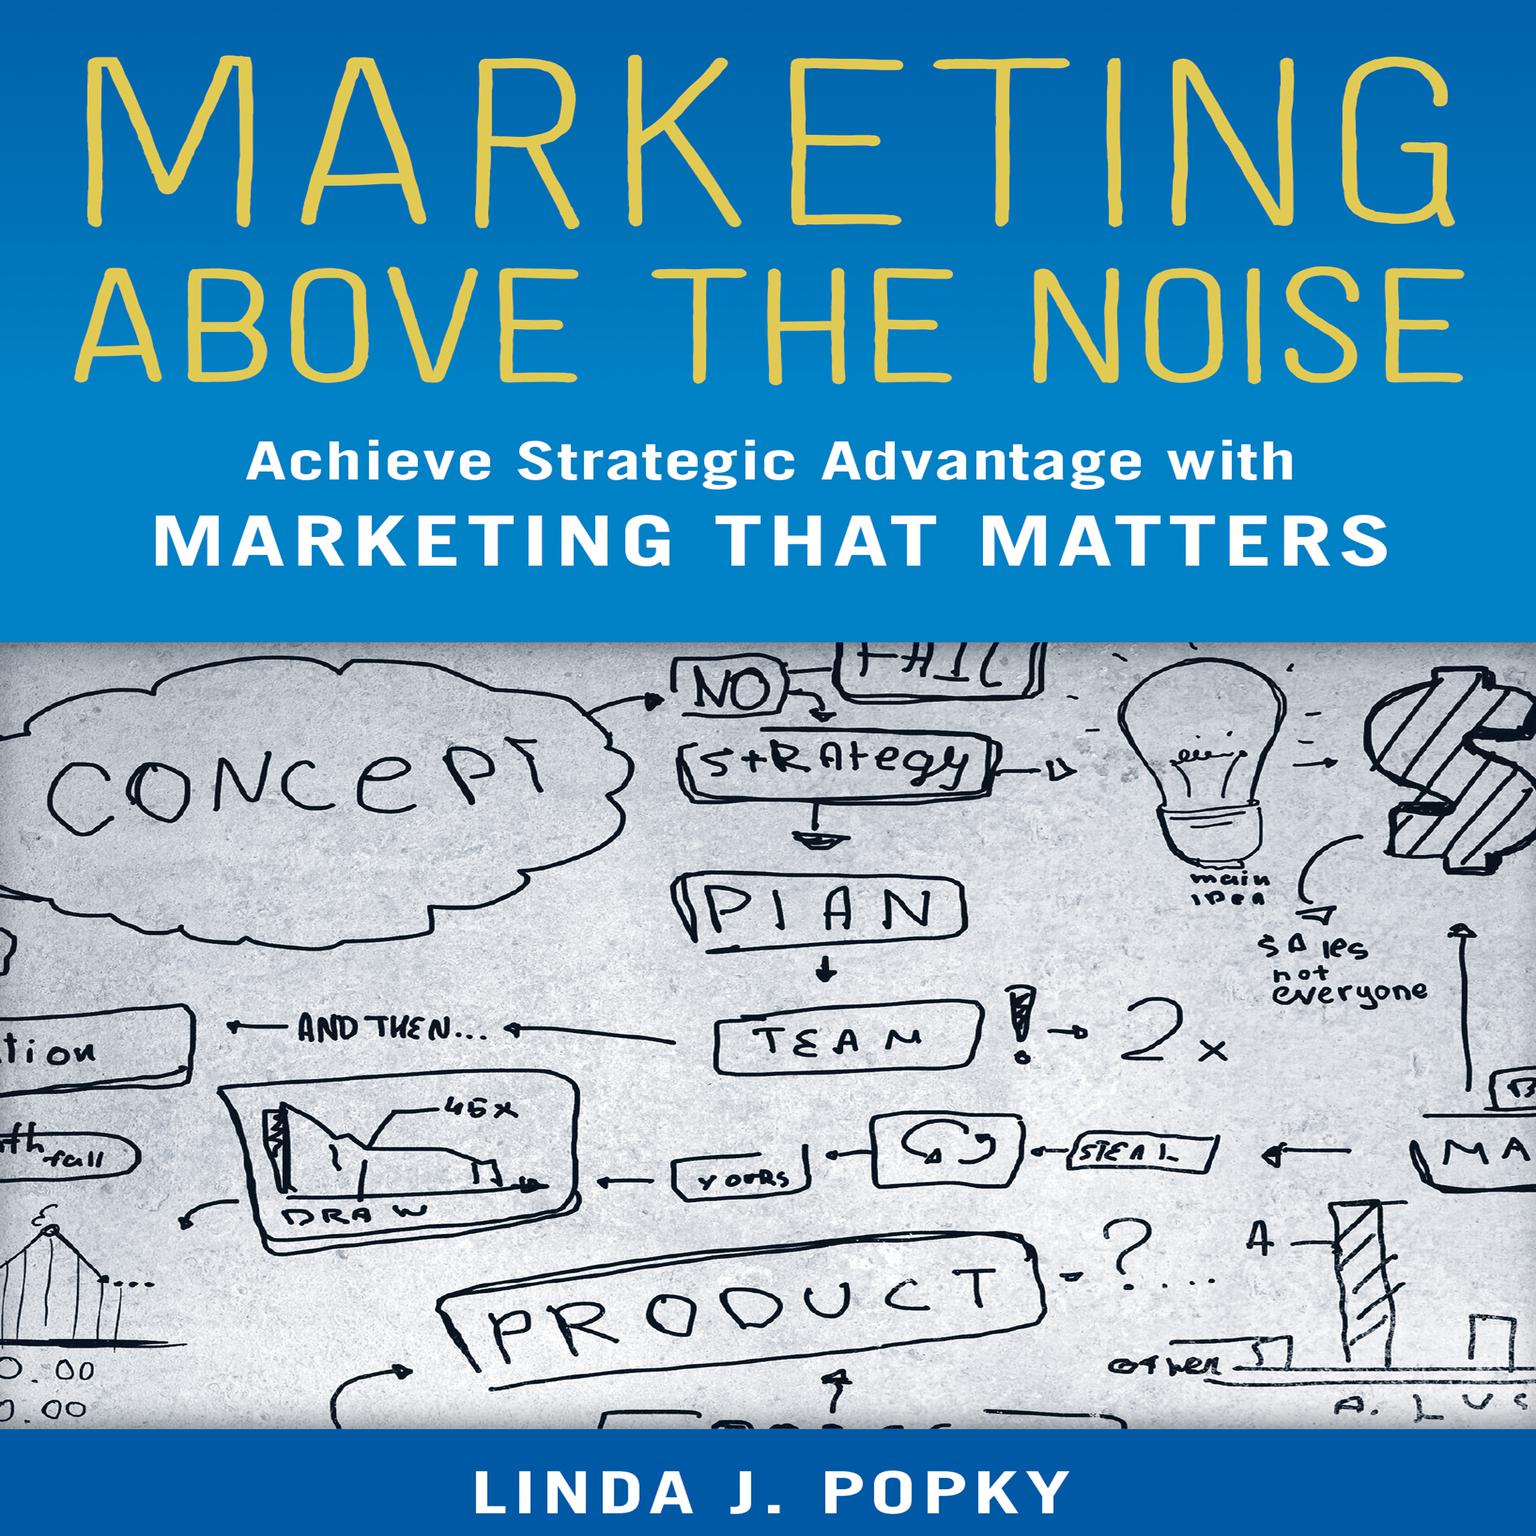 Marketing Above the Noise: Achieve Strategic Advantage with Marketing that Matters Audiobook, by Linda J. Popky